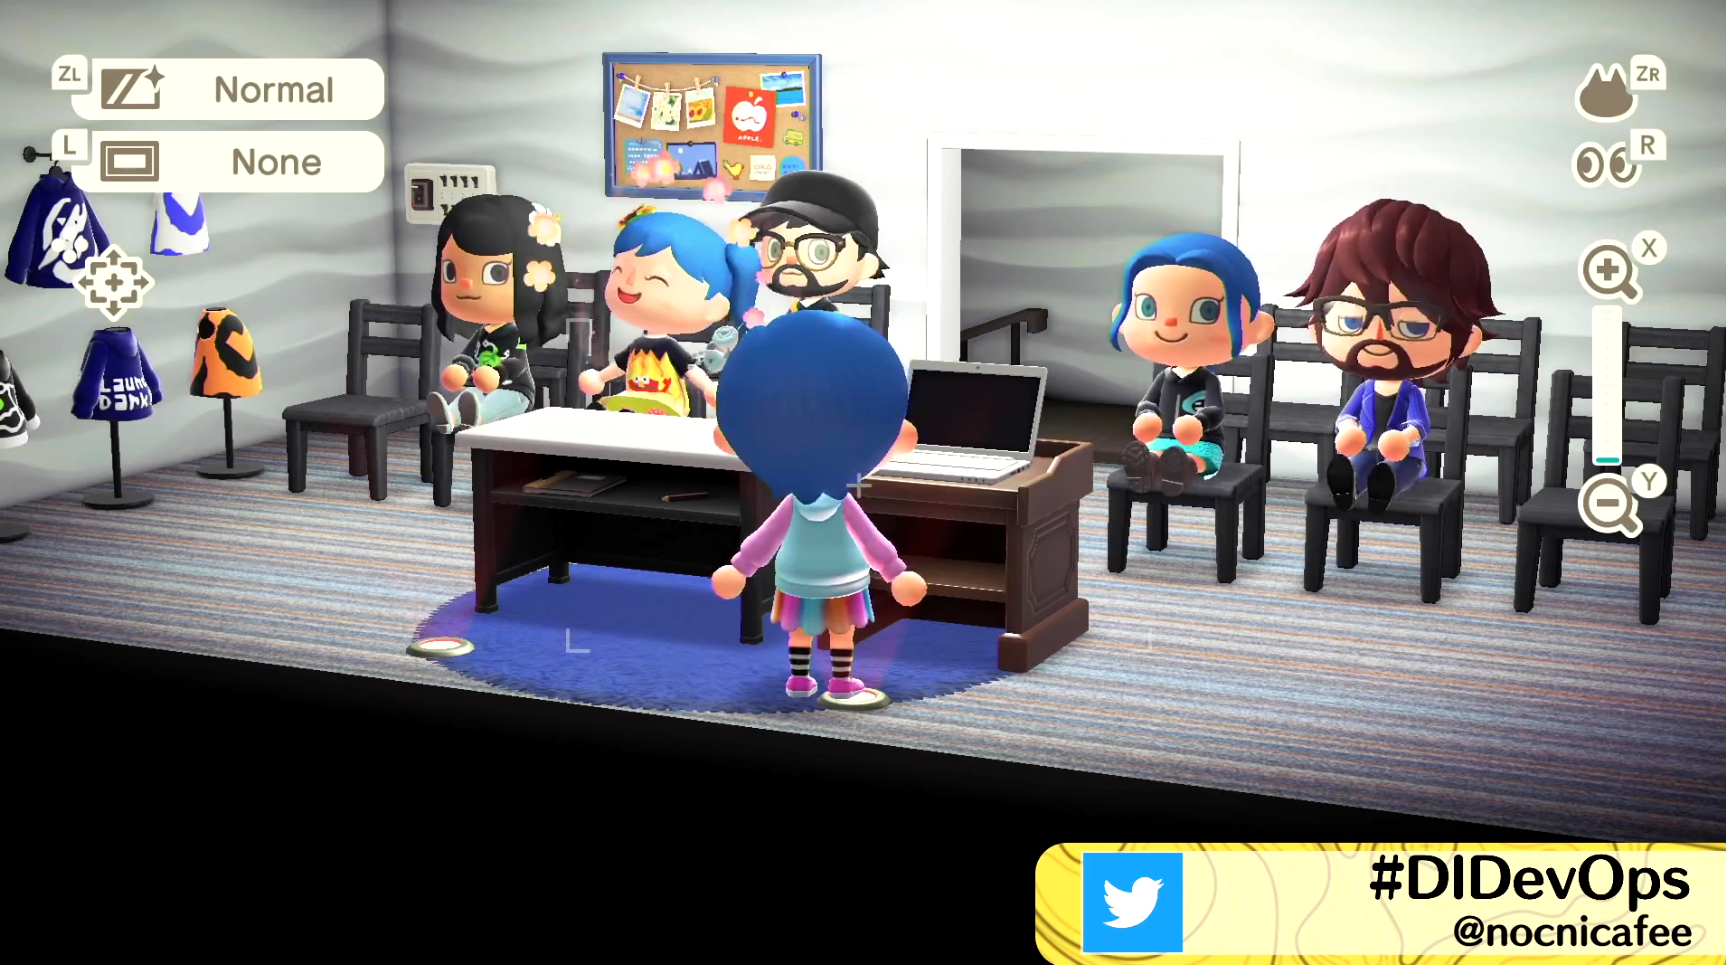 Speaker avatars in the virtual conference center